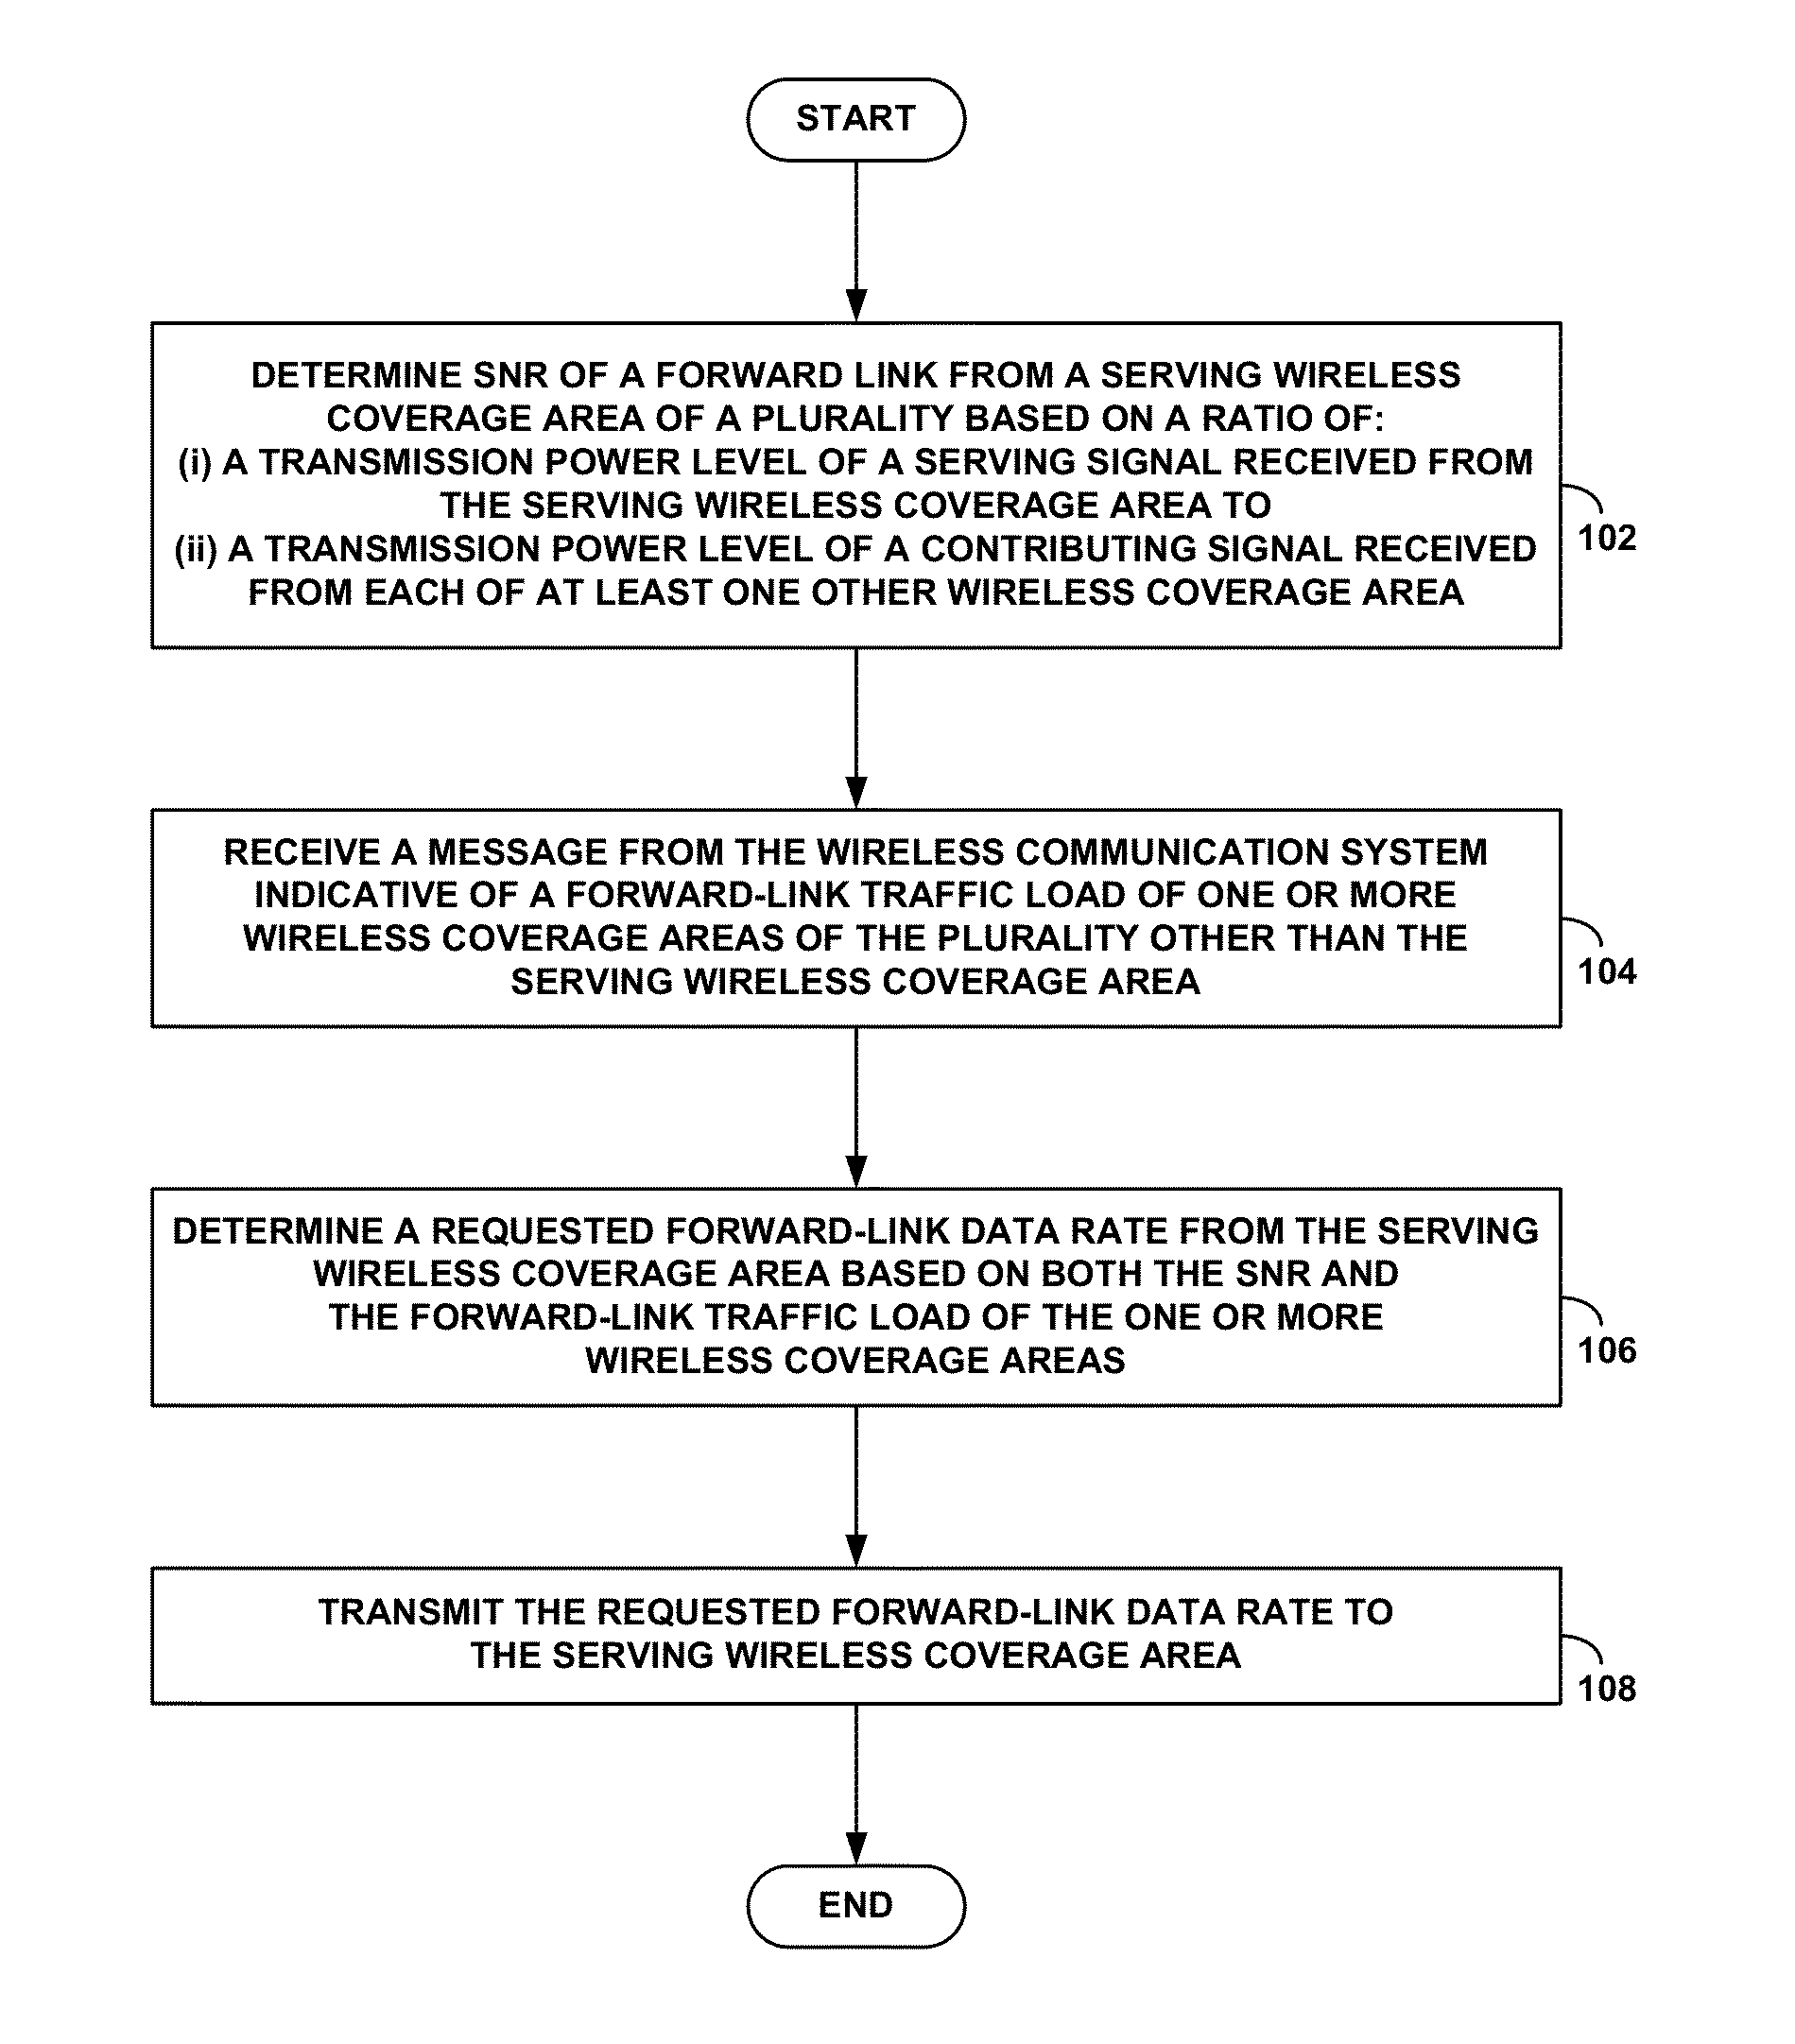 Specification of forward-link rate control based on neighbor load